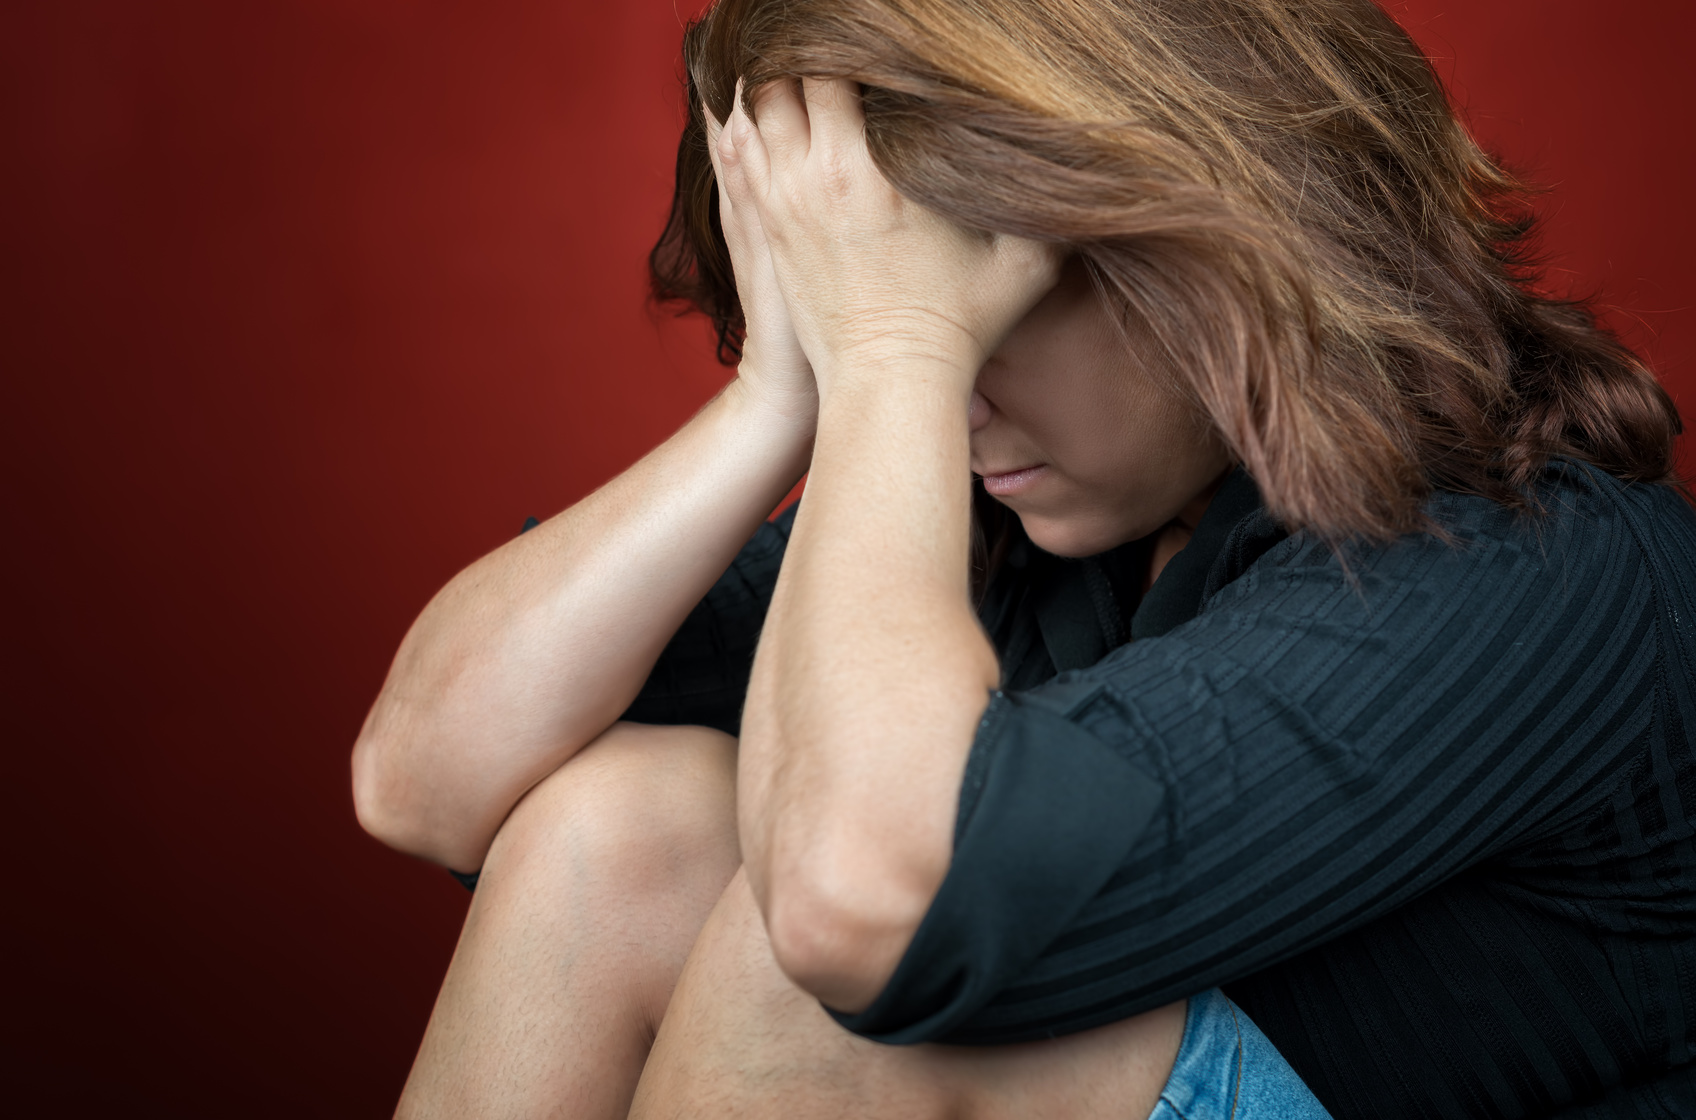 Help for women experiencing domestic abuse